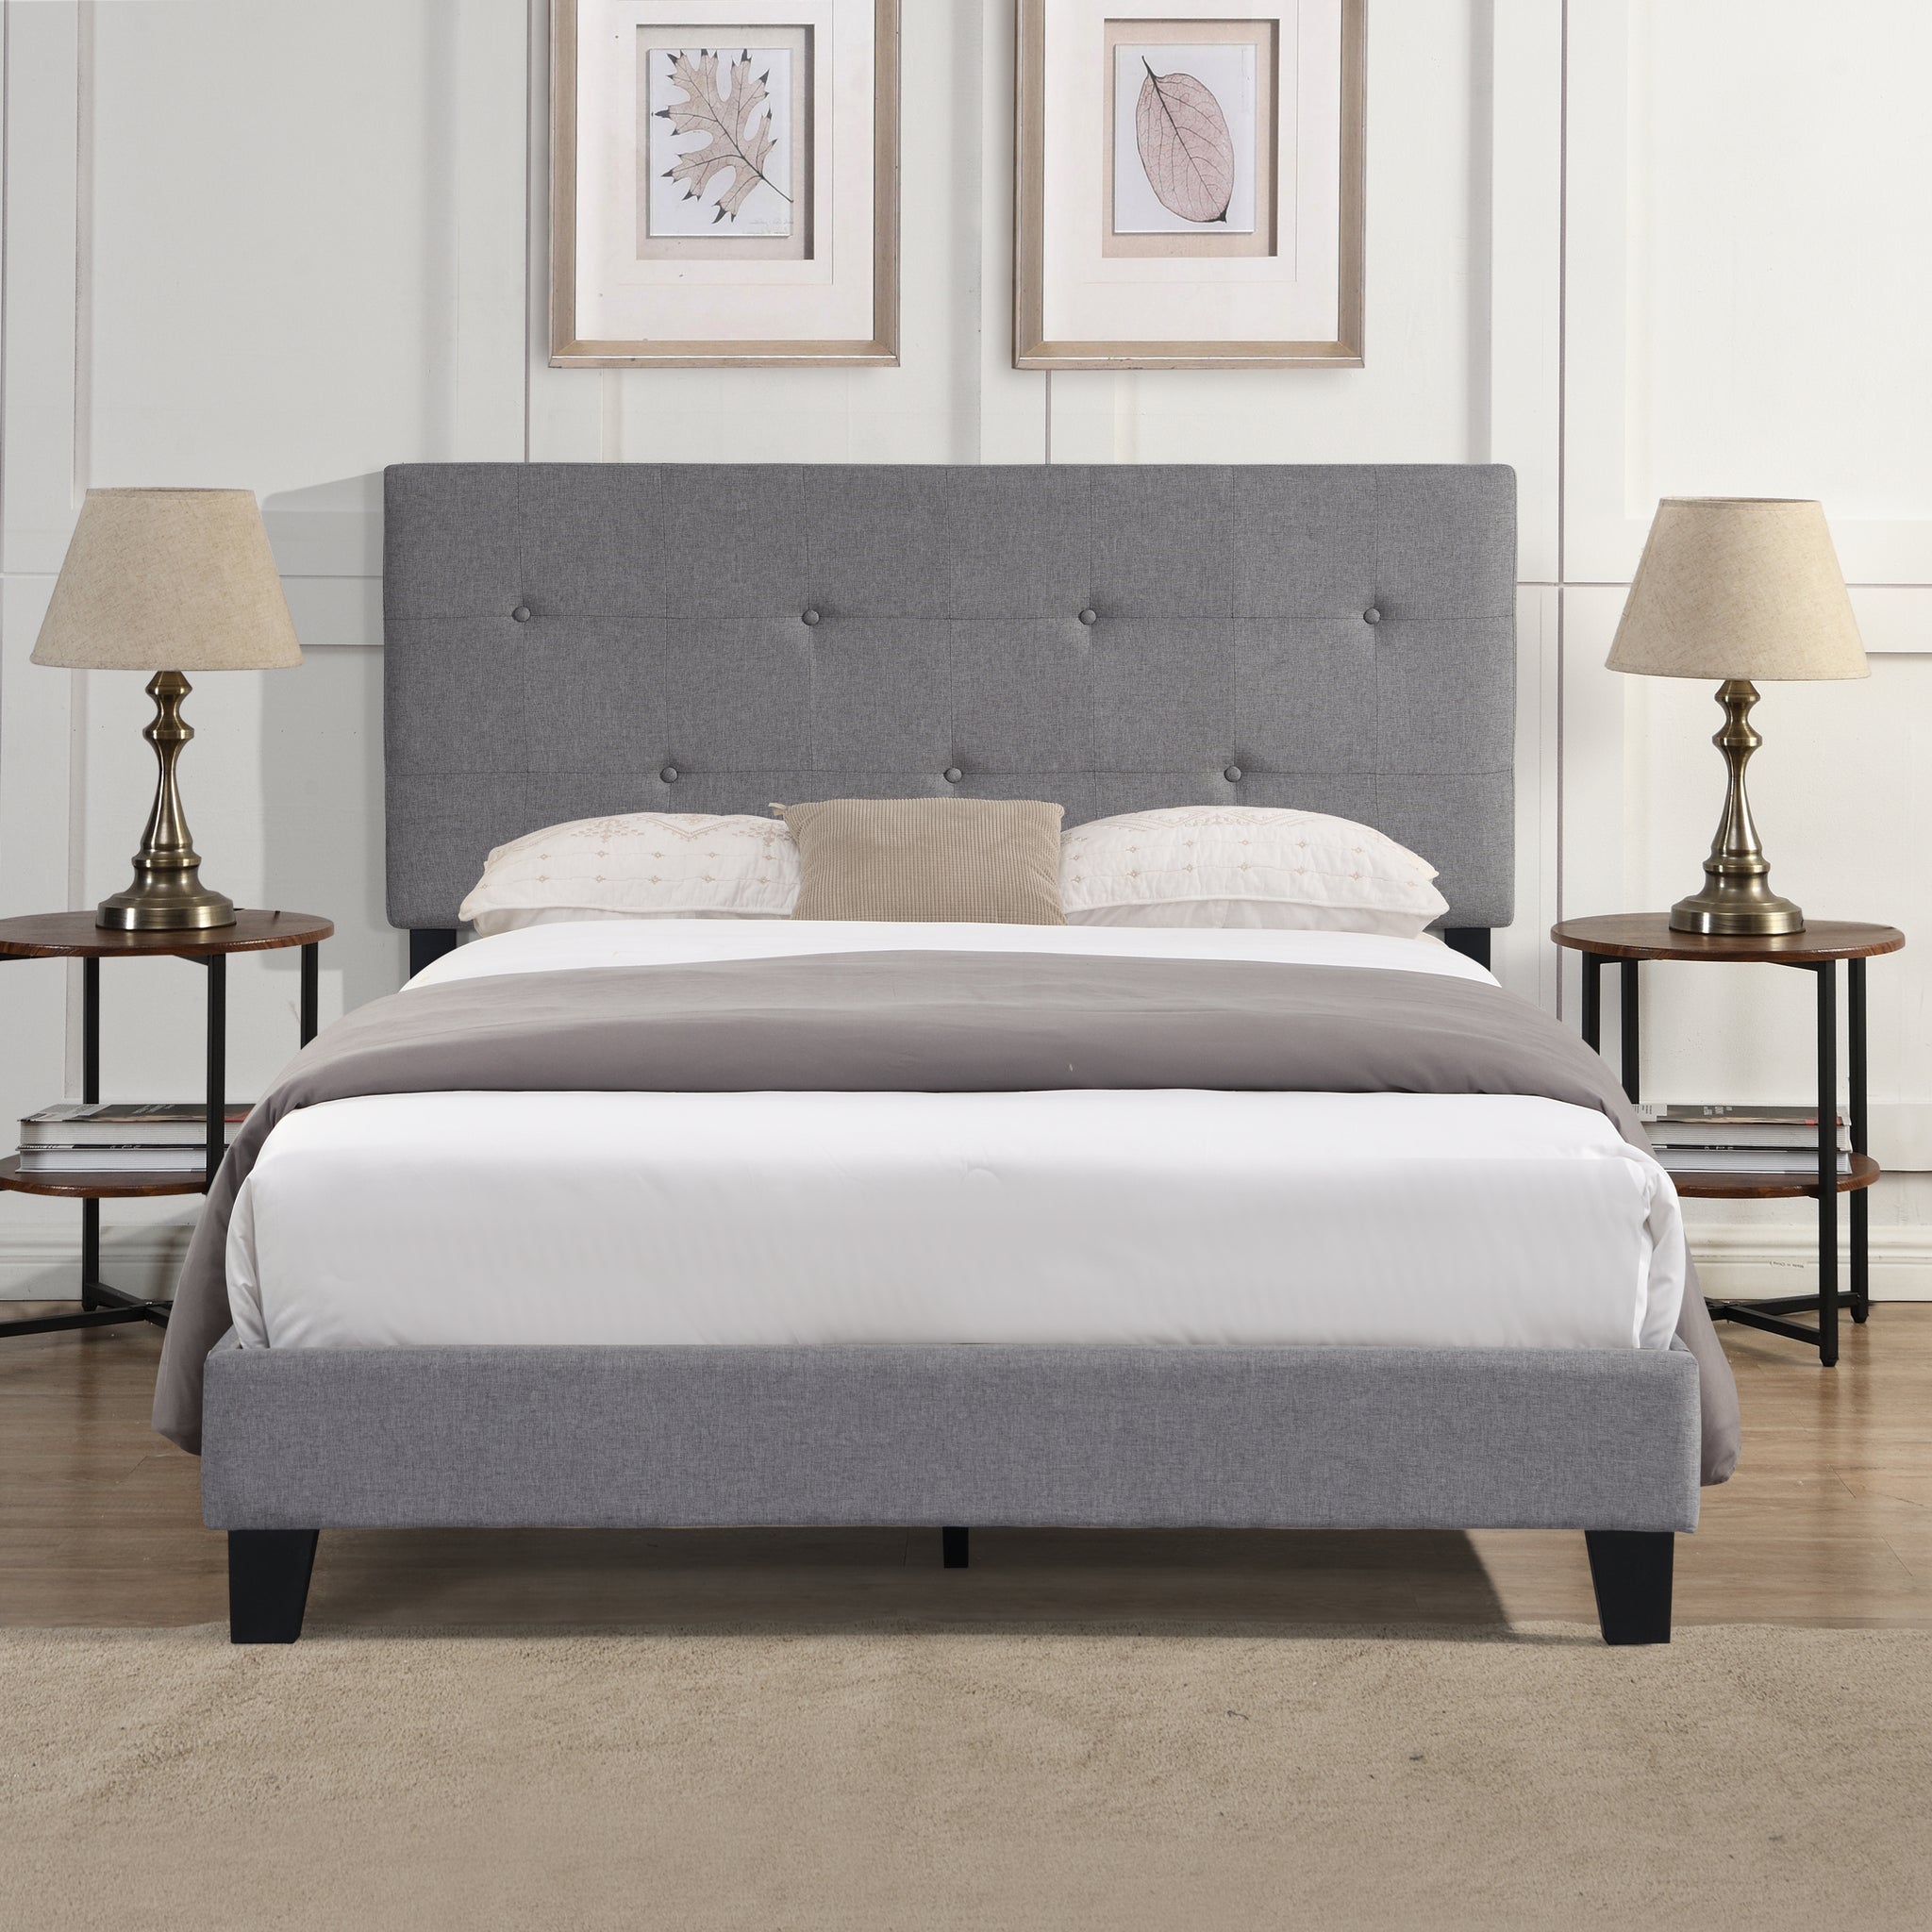 Queen Size Upholstered Platform Bed Frame with Button gray-linen